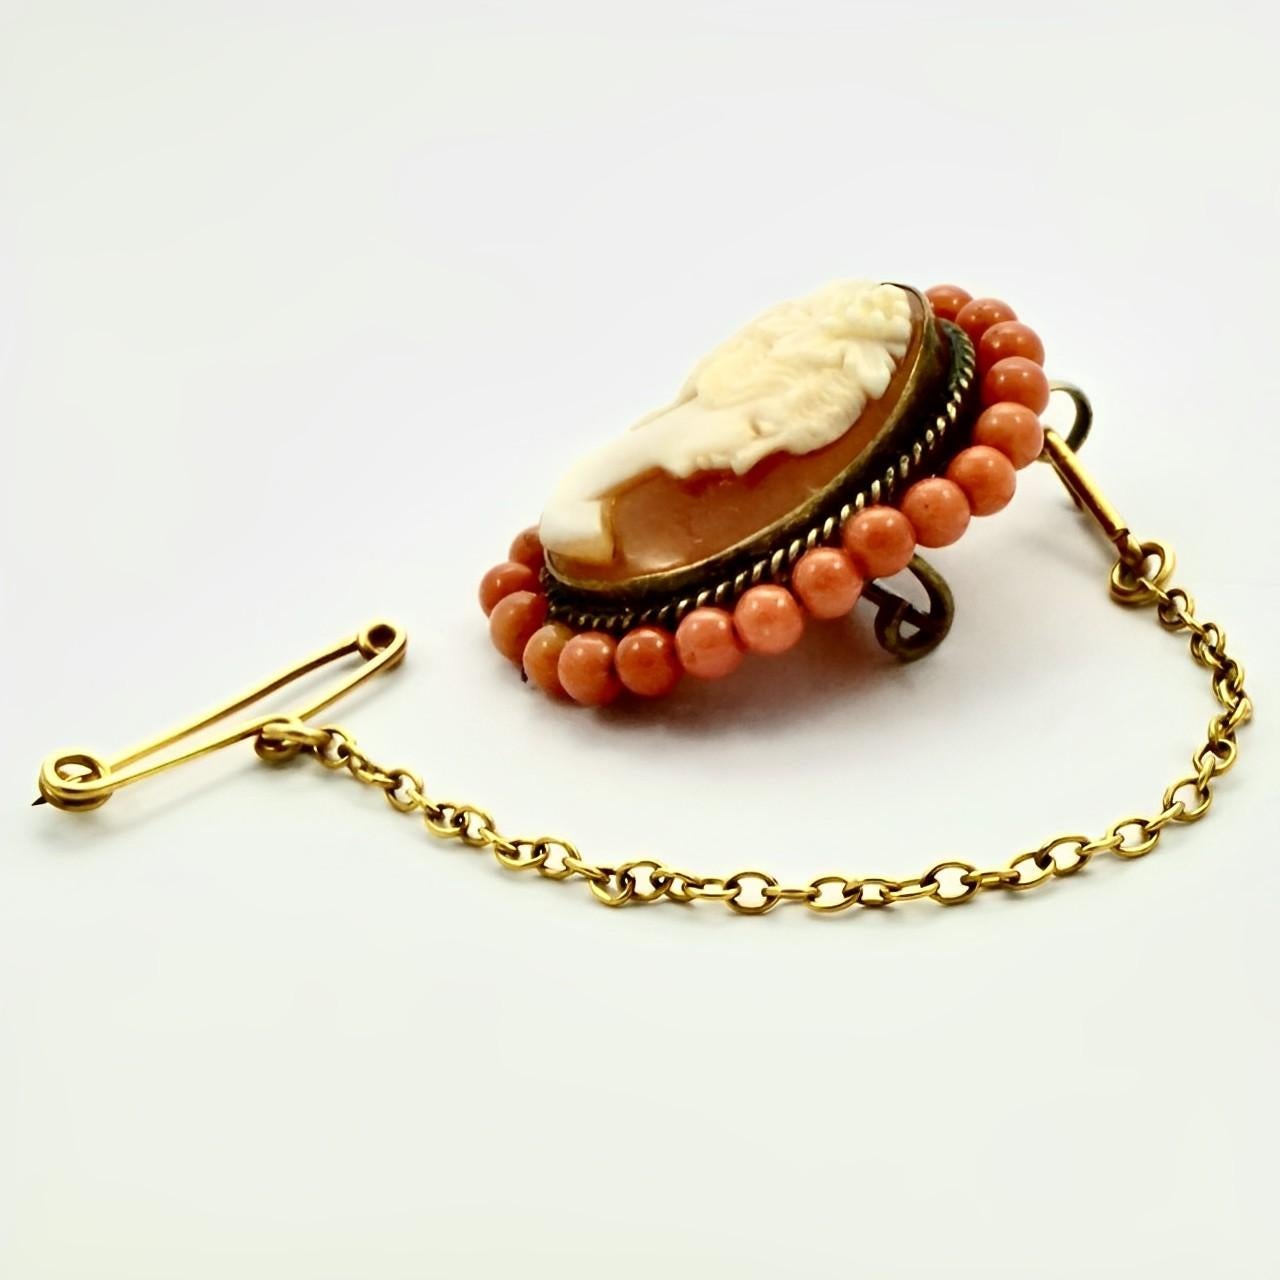 Antique Gold Plated Shell Cameo Brooch with Coral Bead Surround In Good Condition For Sale In London, GB